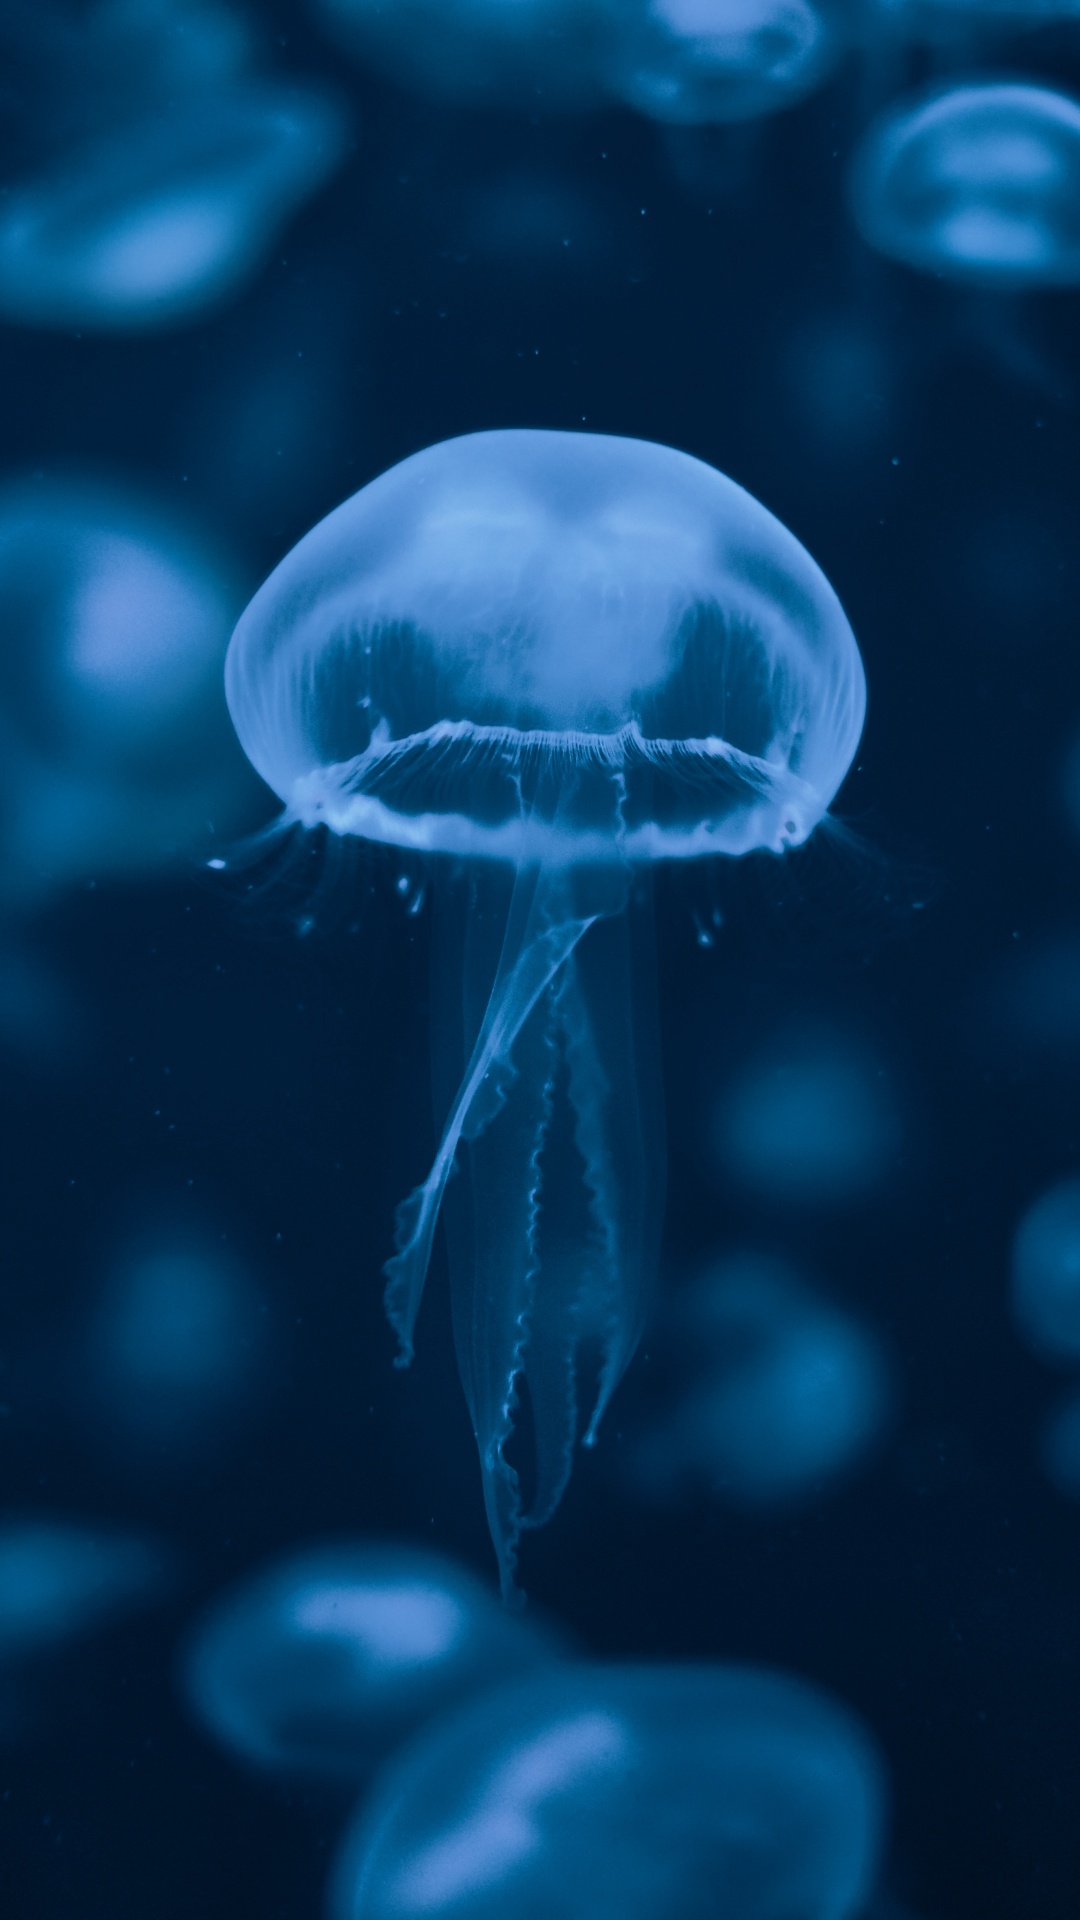 Blue and White Jellyfish Illustration. Wallpaper in 1080x1920 Resolution